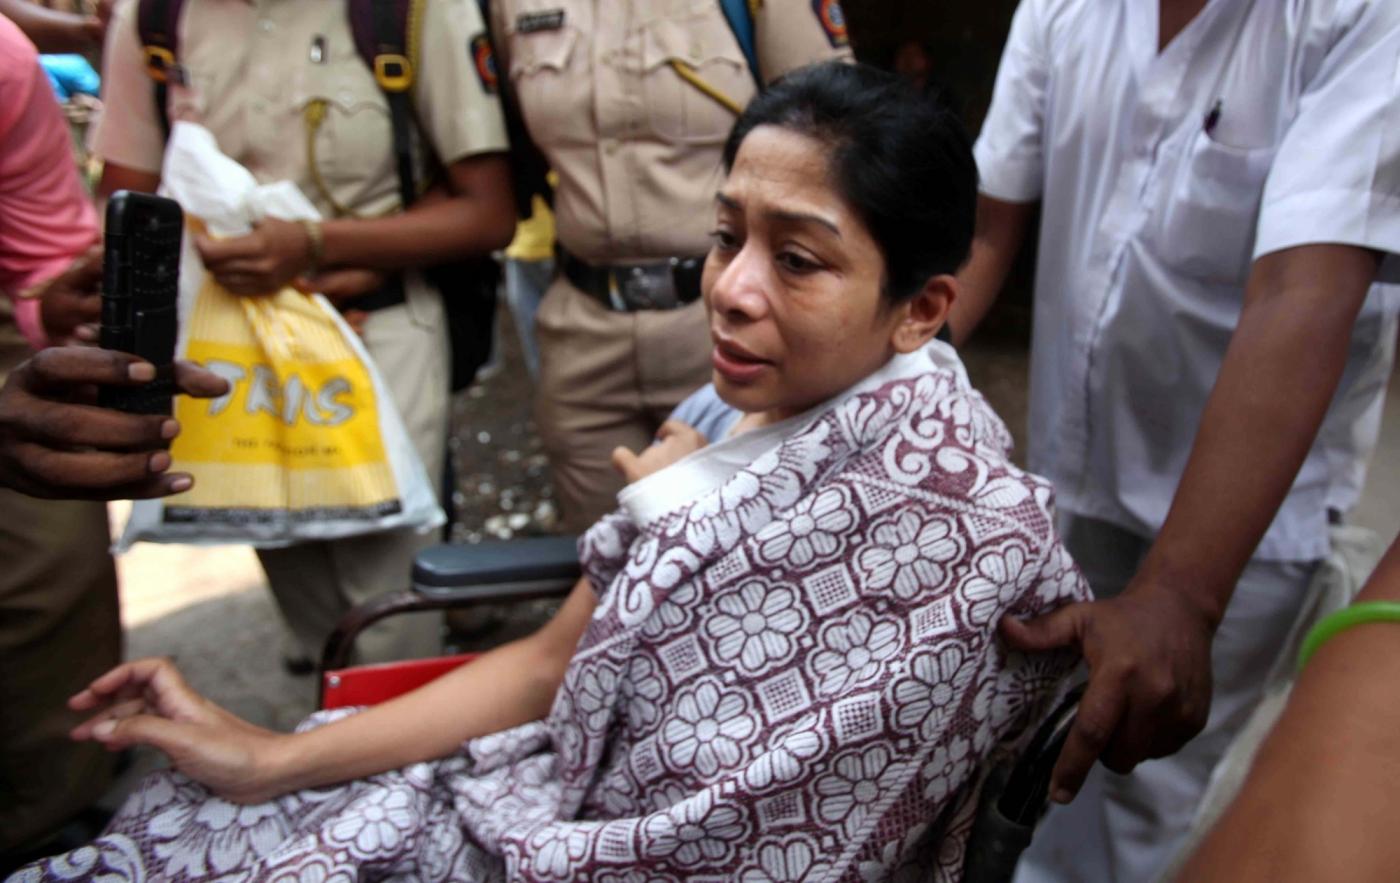 Mumbai: Former INX Media chief Indrani Mukerjea after being discharged from Sir J.J. Hospital, in Mumbai on April 11, 2018. Indrani - in custody since August 2015 as one of the prime accused in the April 2012 disappearance and subsequent murder of her 24-year old daughter Sheena Bora - underwent a brain MRI scan and other tests after she was rushed to the hospital here due to an alleged drug overdose. (Photo: IANS) by .